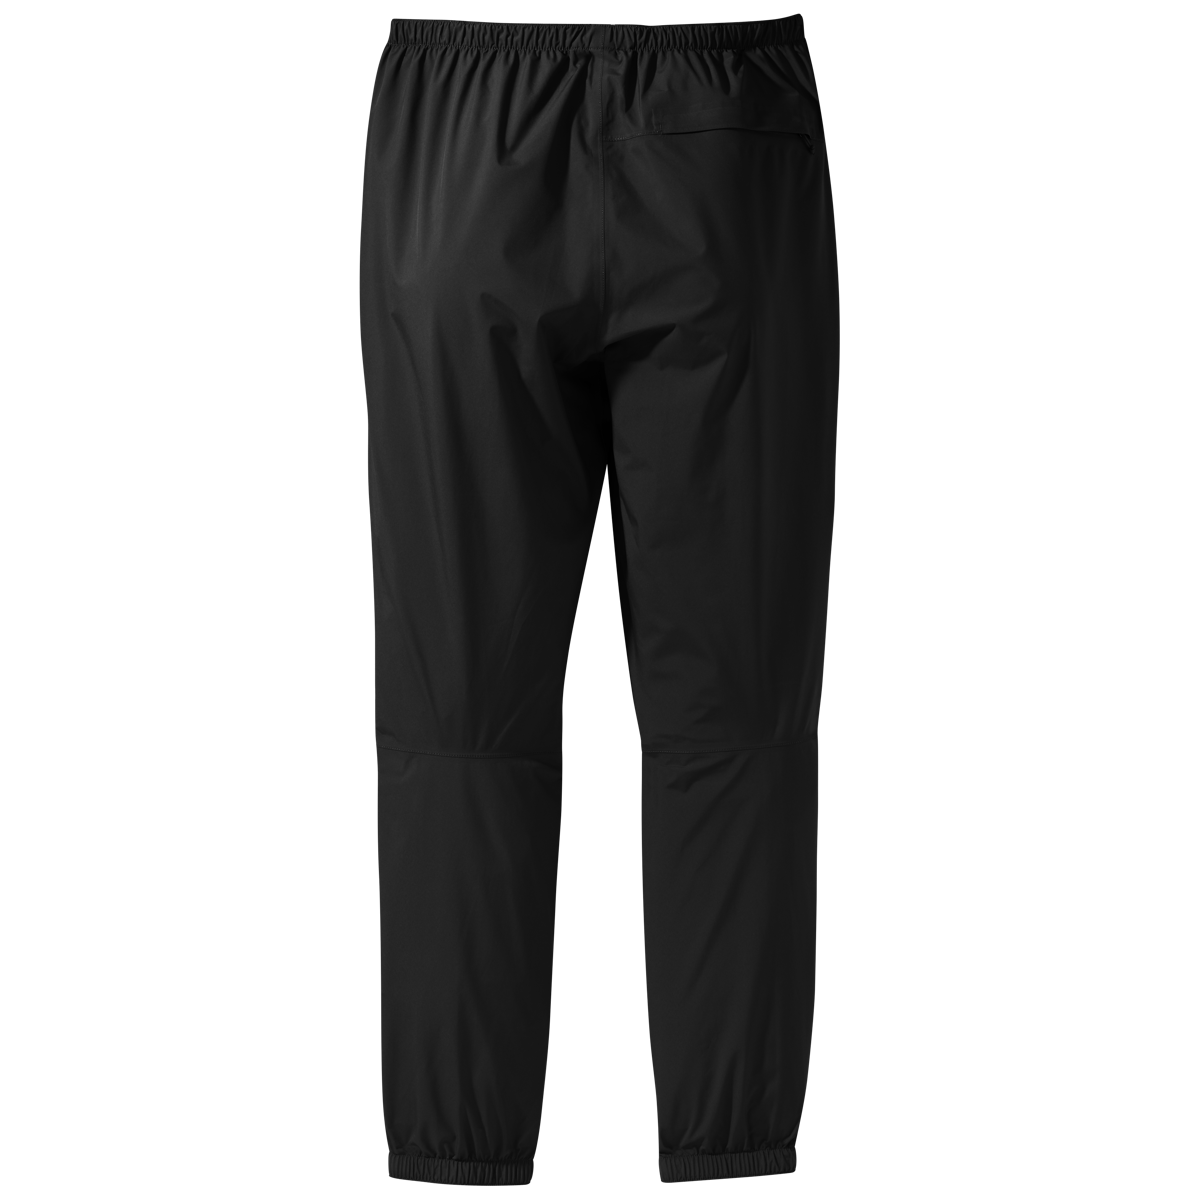 Outdoor Research Men's Foray Pants - Short